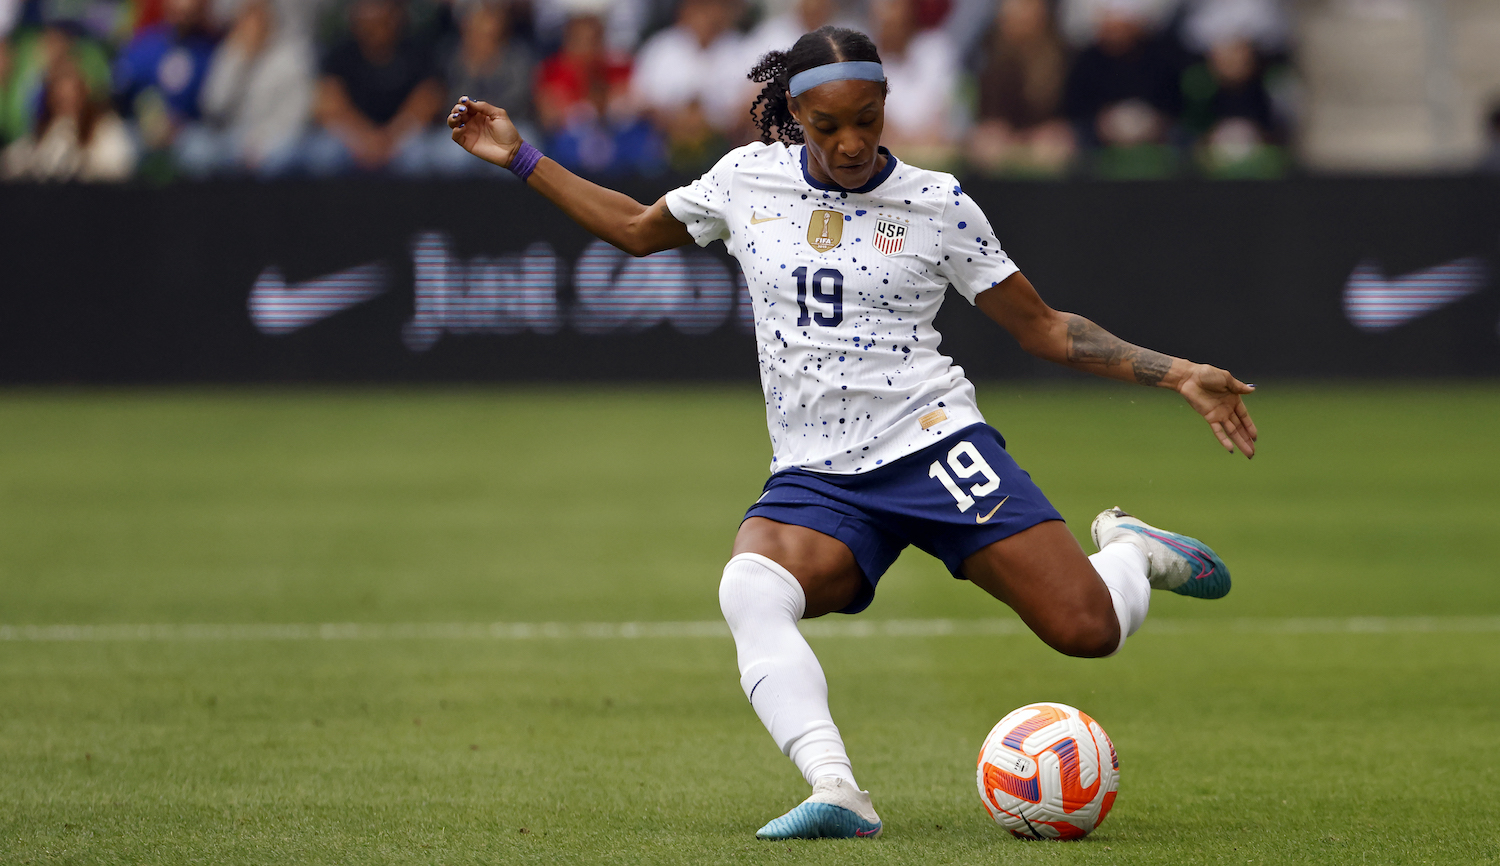 AUSTIN, TEXAS - APRIL 8: Crystal Dunn #19 of the United States passes the ball during the first half against the Republic of Ireland in a 2023 International Friendly match at Q2 Stadium on April 8, 2023 in Austin, Texas. (Photo by Ron Jenkins/Getty Images)